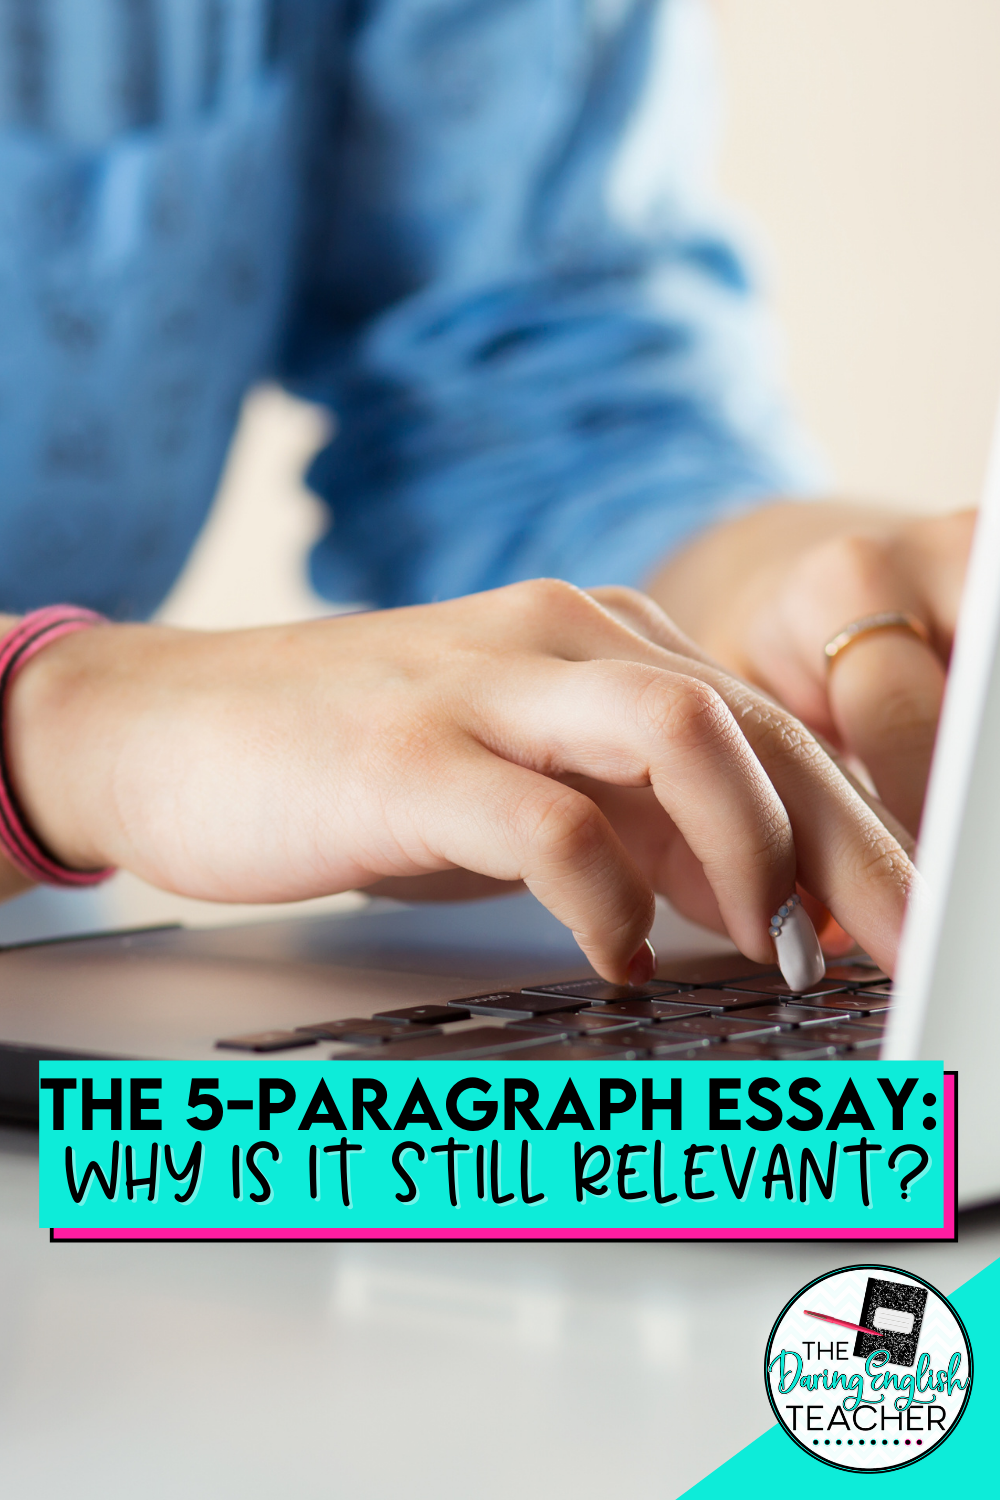 The Five-Paragraph Essay: Why is It Still Relevant?